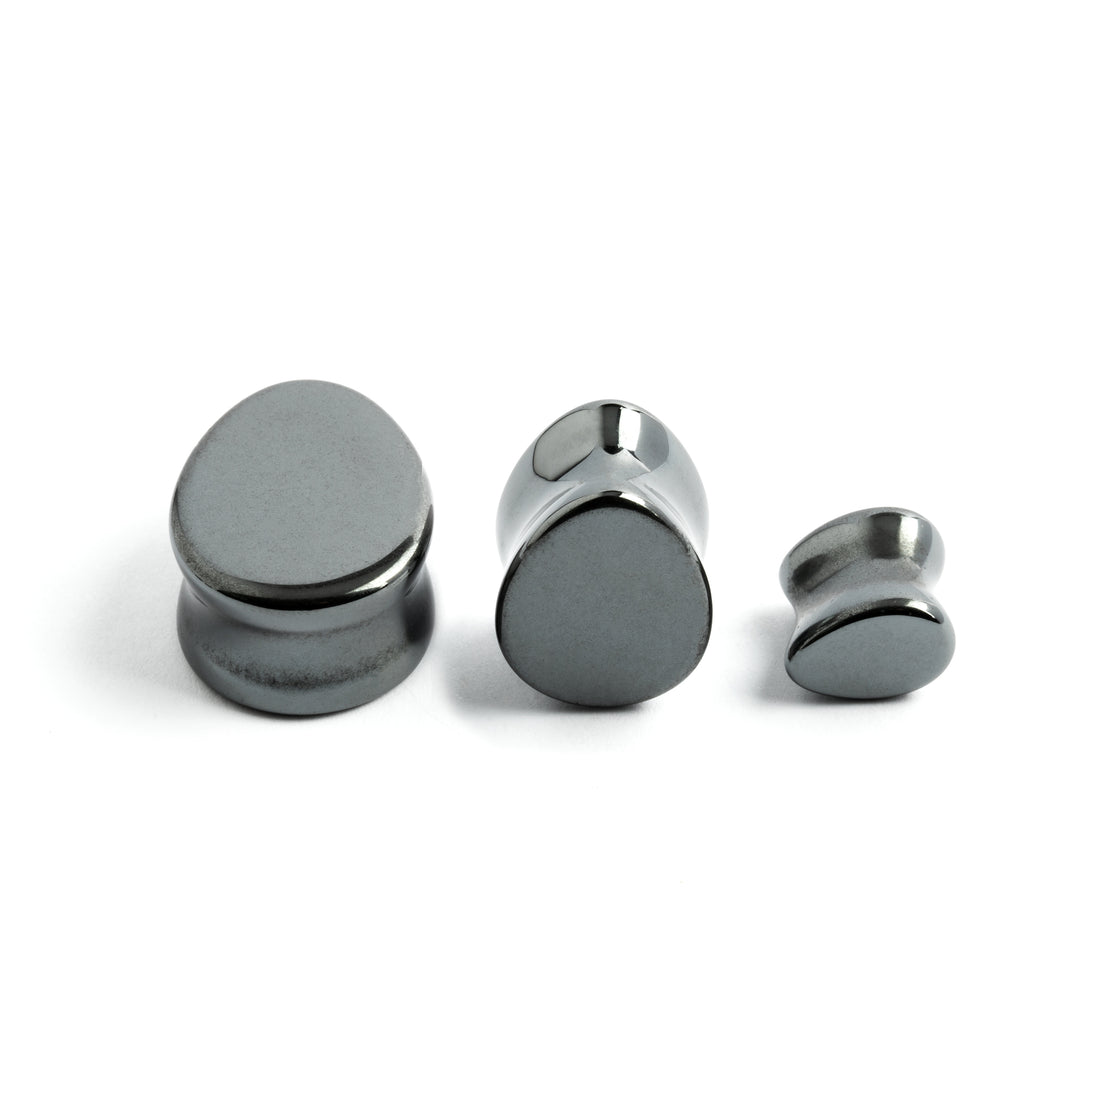 several sizes of  hematite stone teardrop shaped ear plugs front and side view